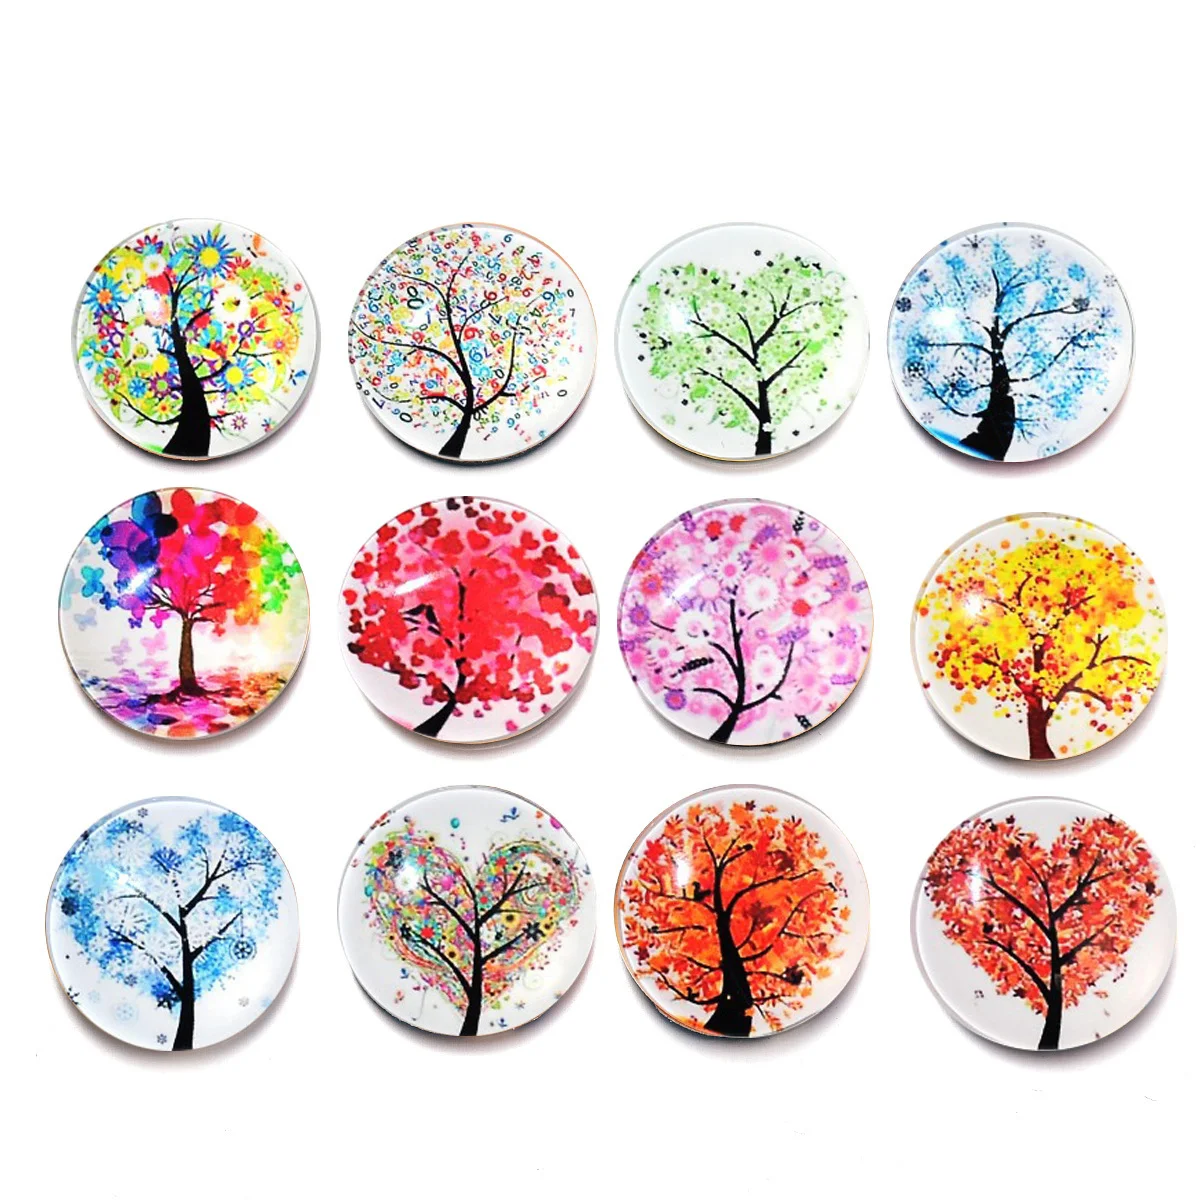 

12 Pcs Photo Magnet Fridge Stickers Magnetic Fridge Whiteboard Decorative Magnets Round Magnet Glass Magnets Stickers Decorate